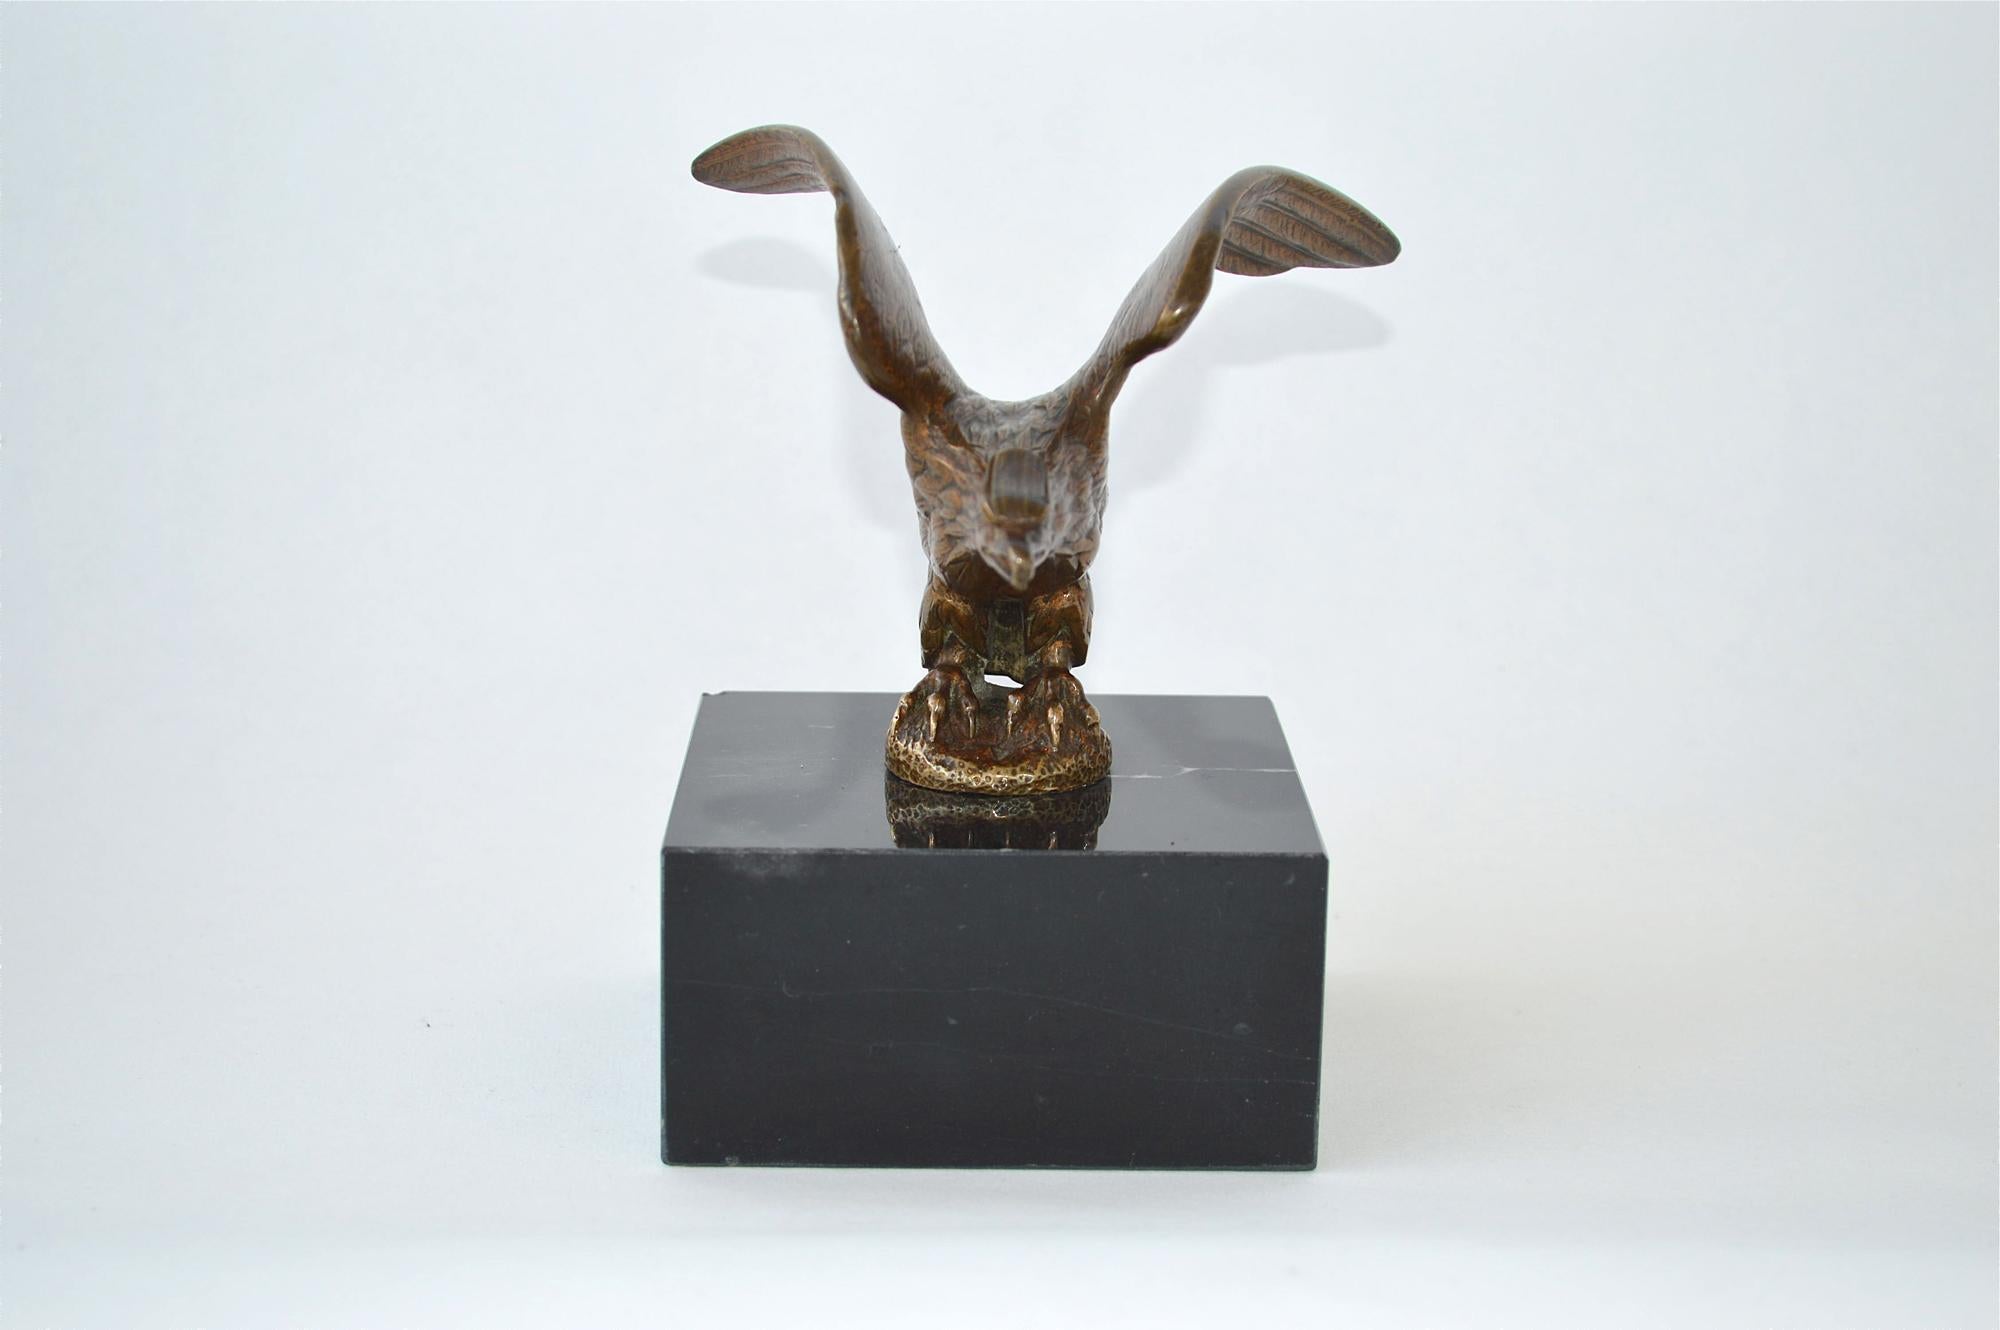 A very nice quality bronze sculpture of an eagle. Made in England and dating from circa 1890. In good and solid condition with one small chip to the marble base at the back.